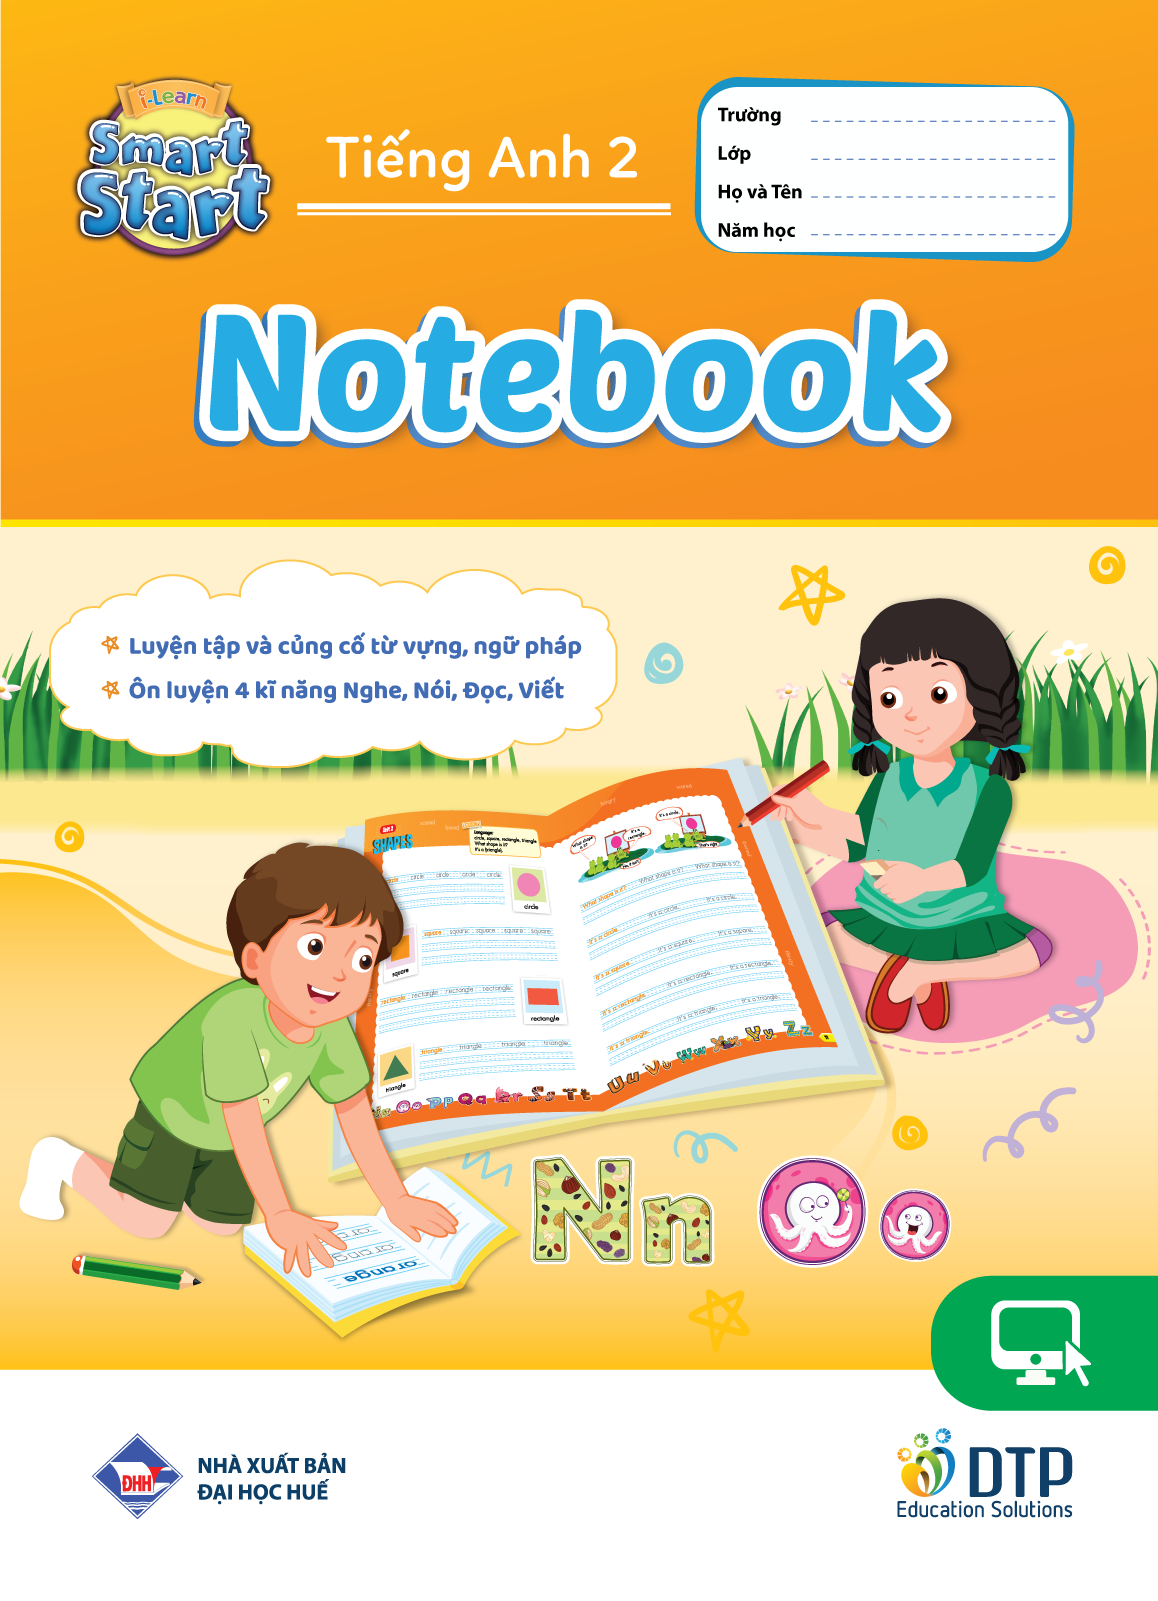 Tiếng Anh 2 i-Learn Smart Start pack 1 (SB, WB, NB)